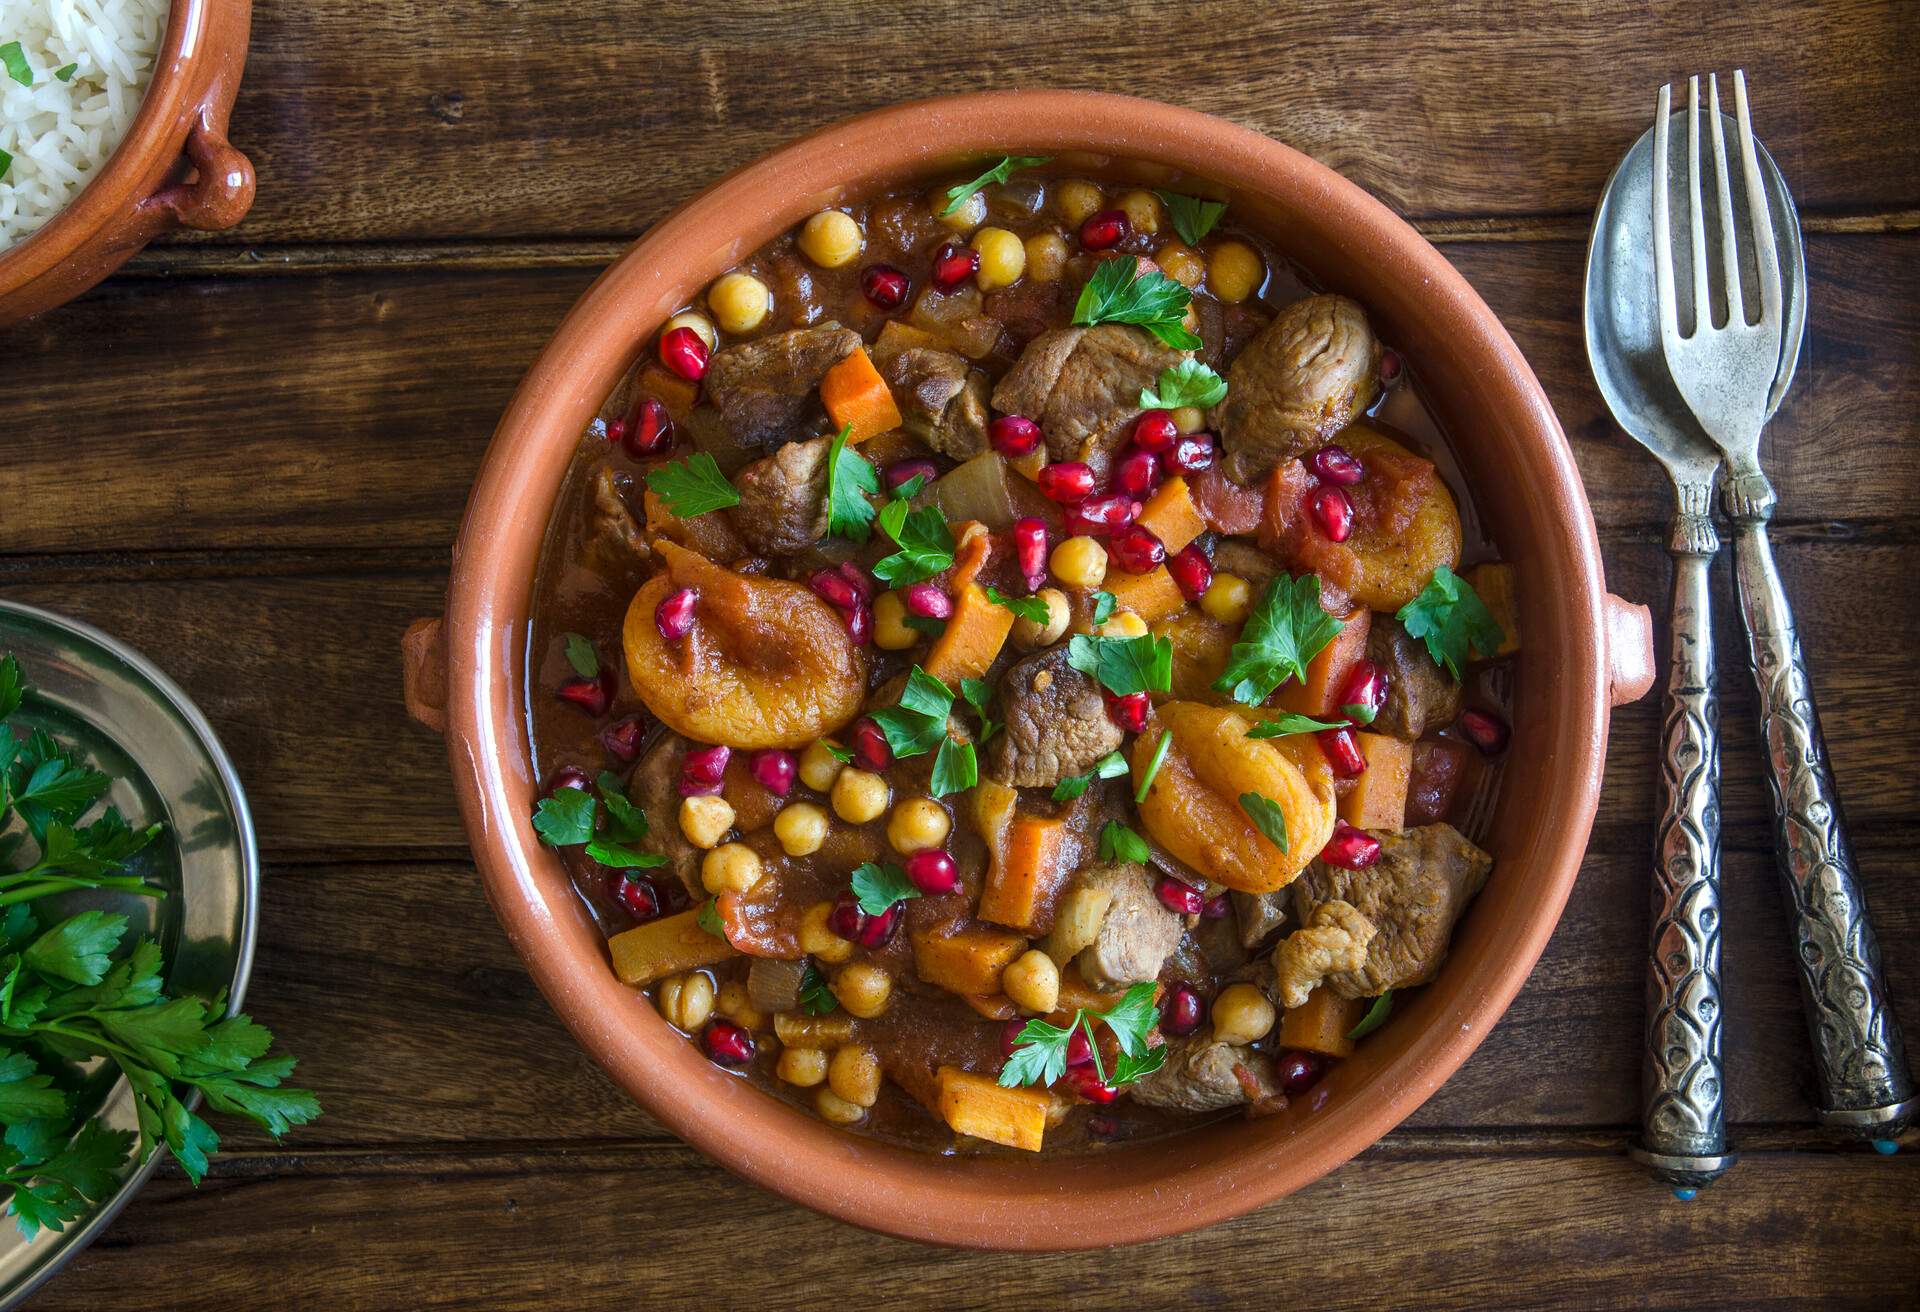 Lamb tagine with chickpeas, apricots and pomegranate seeds